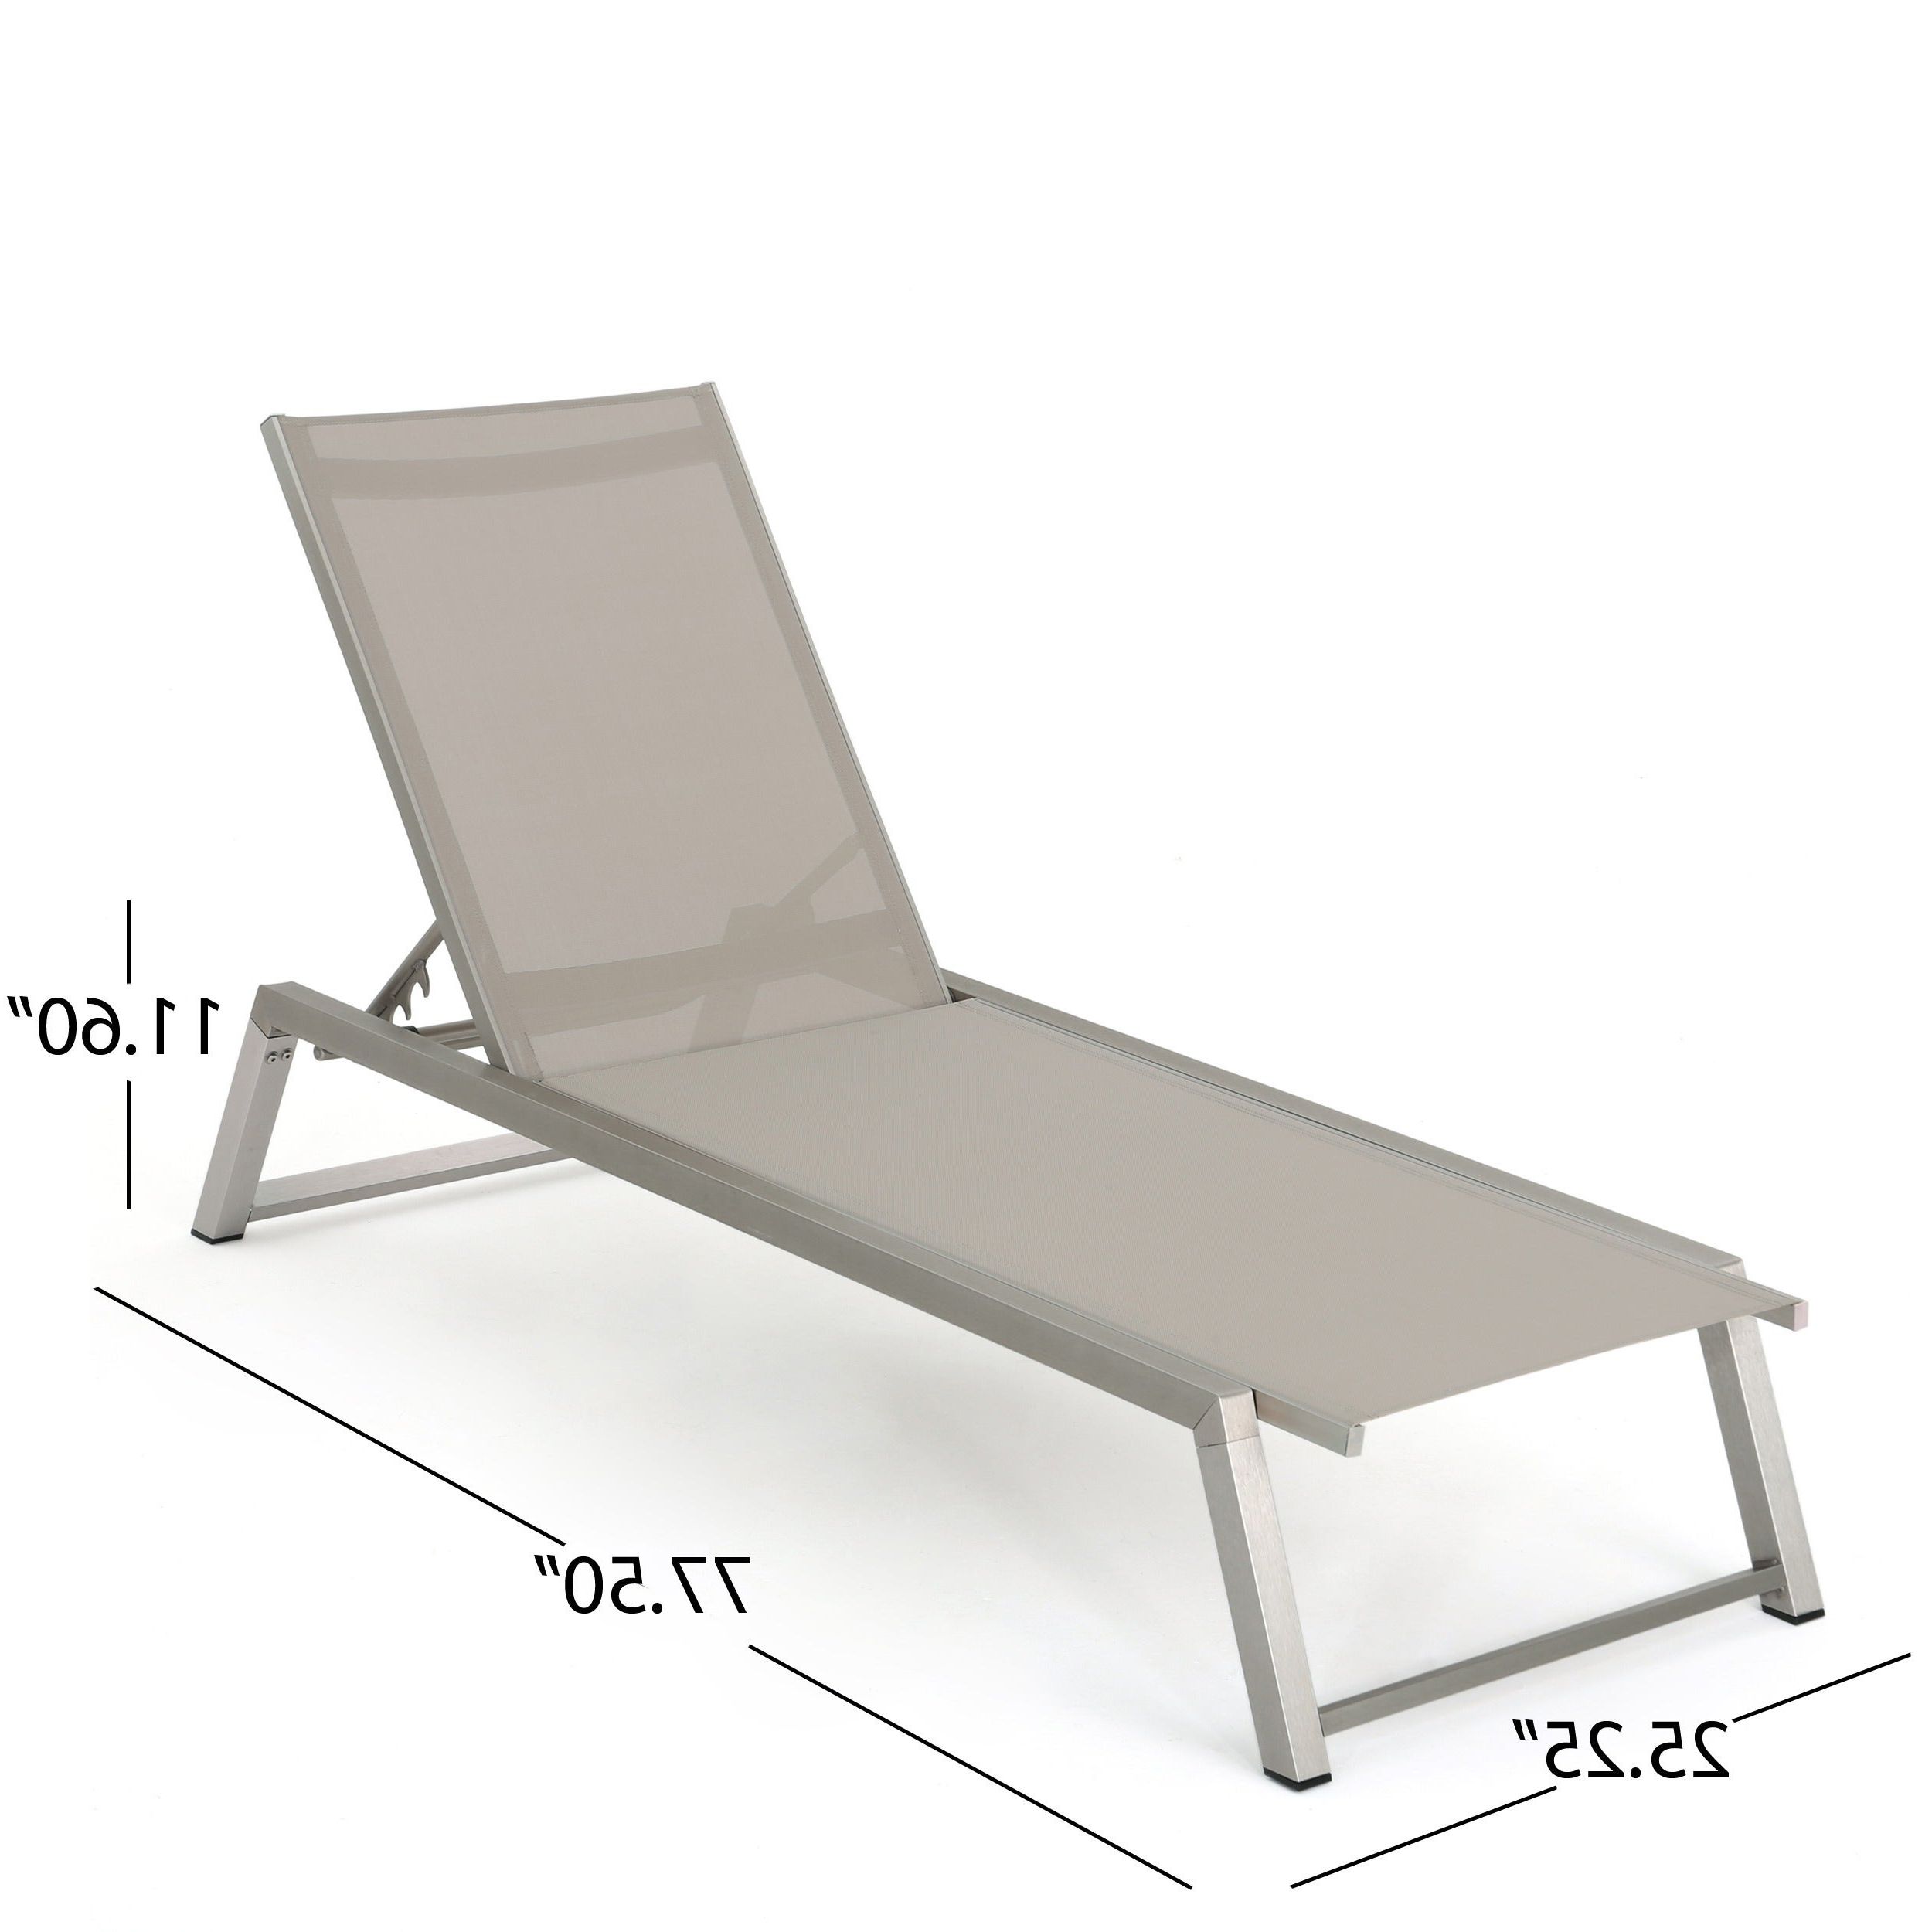 Favorite Myers Outdoor Aluminum Mesh Chaise Loungechristopher Knight Home Regarding Outdoor Aluminum Chaise Lounges (View 11 of 25)